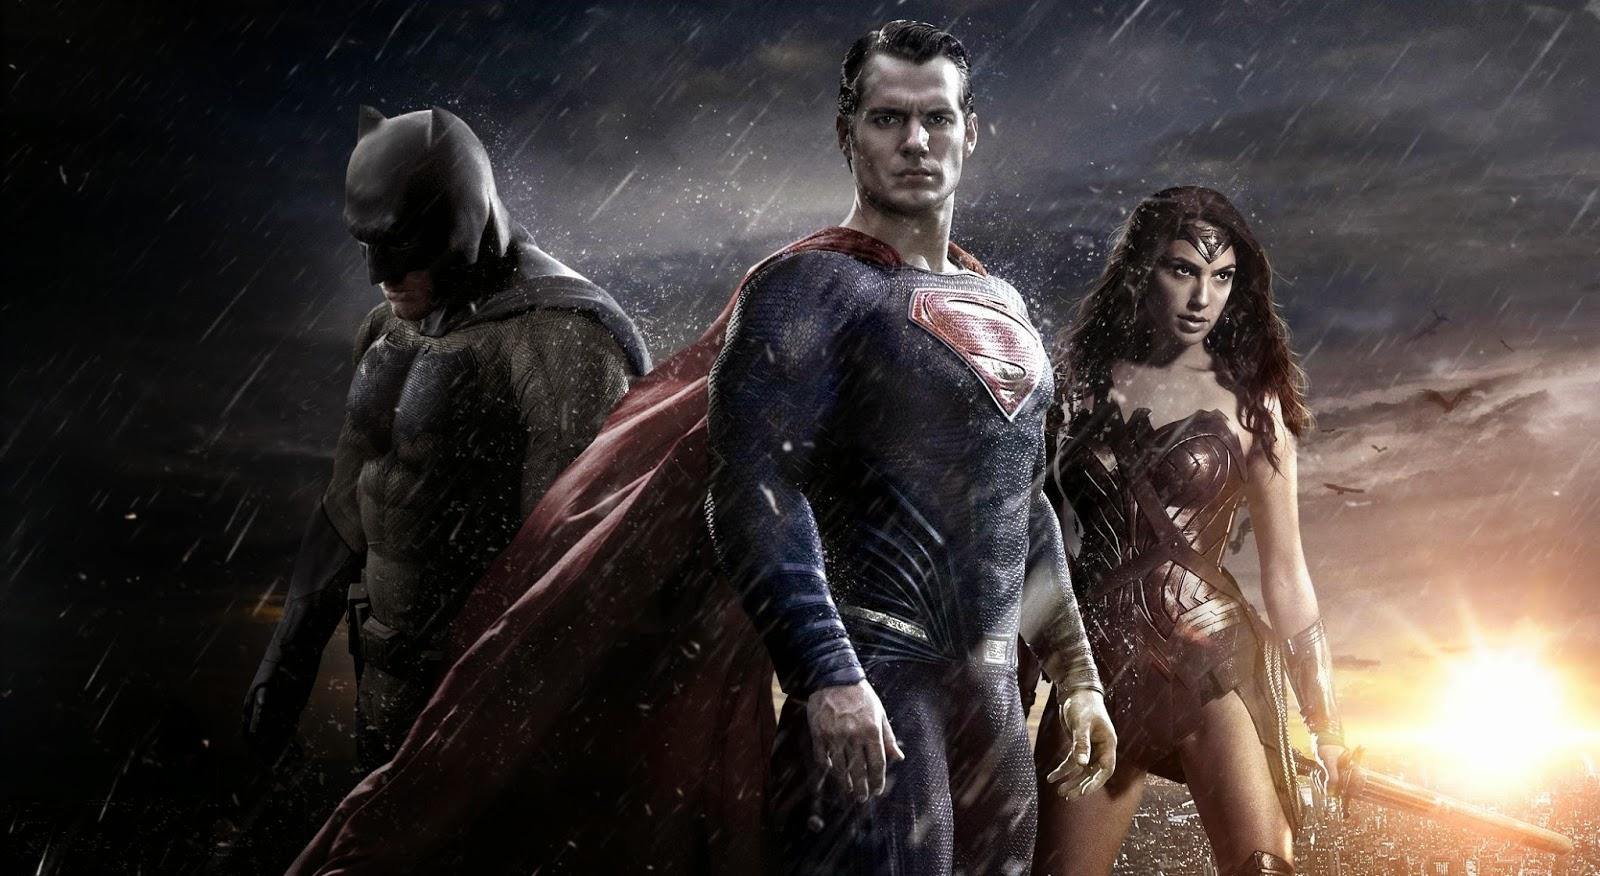 New TV Spots Footage From ‘Batman v Superman: Dawn of Justice’